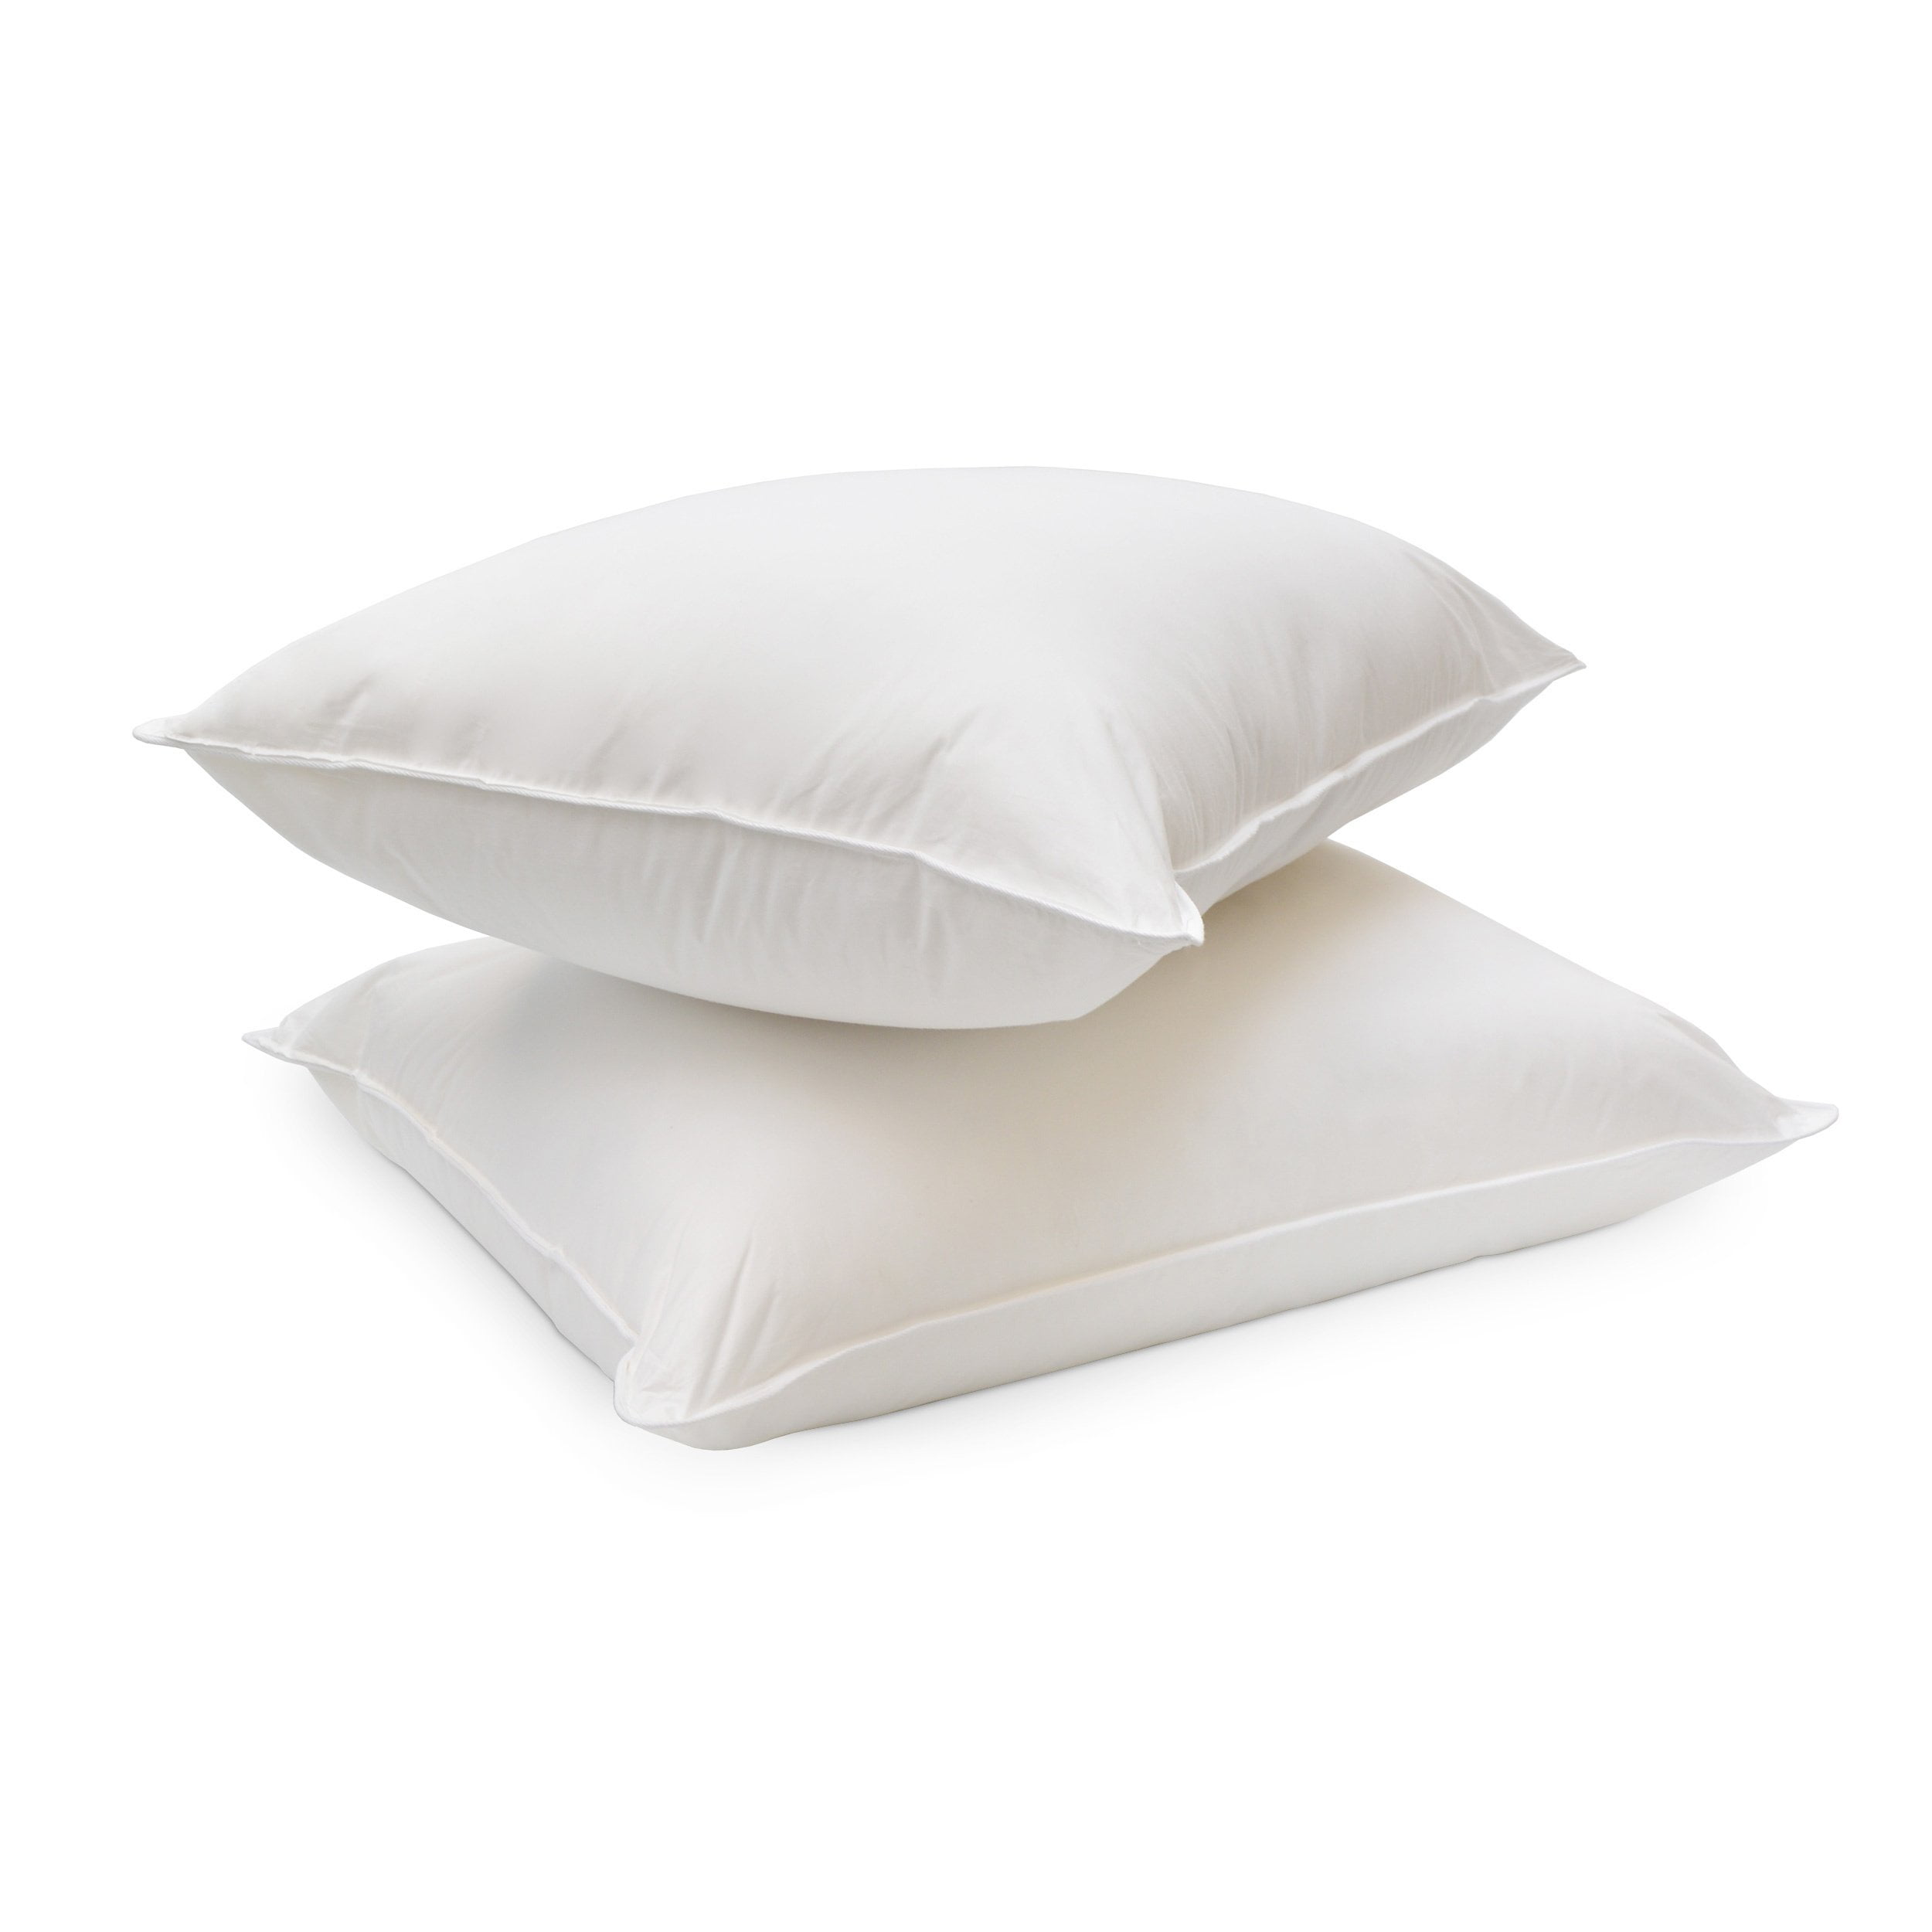 Pillow pair Memory Cervical With Pillowcase Cotton Removable Non-allergenic